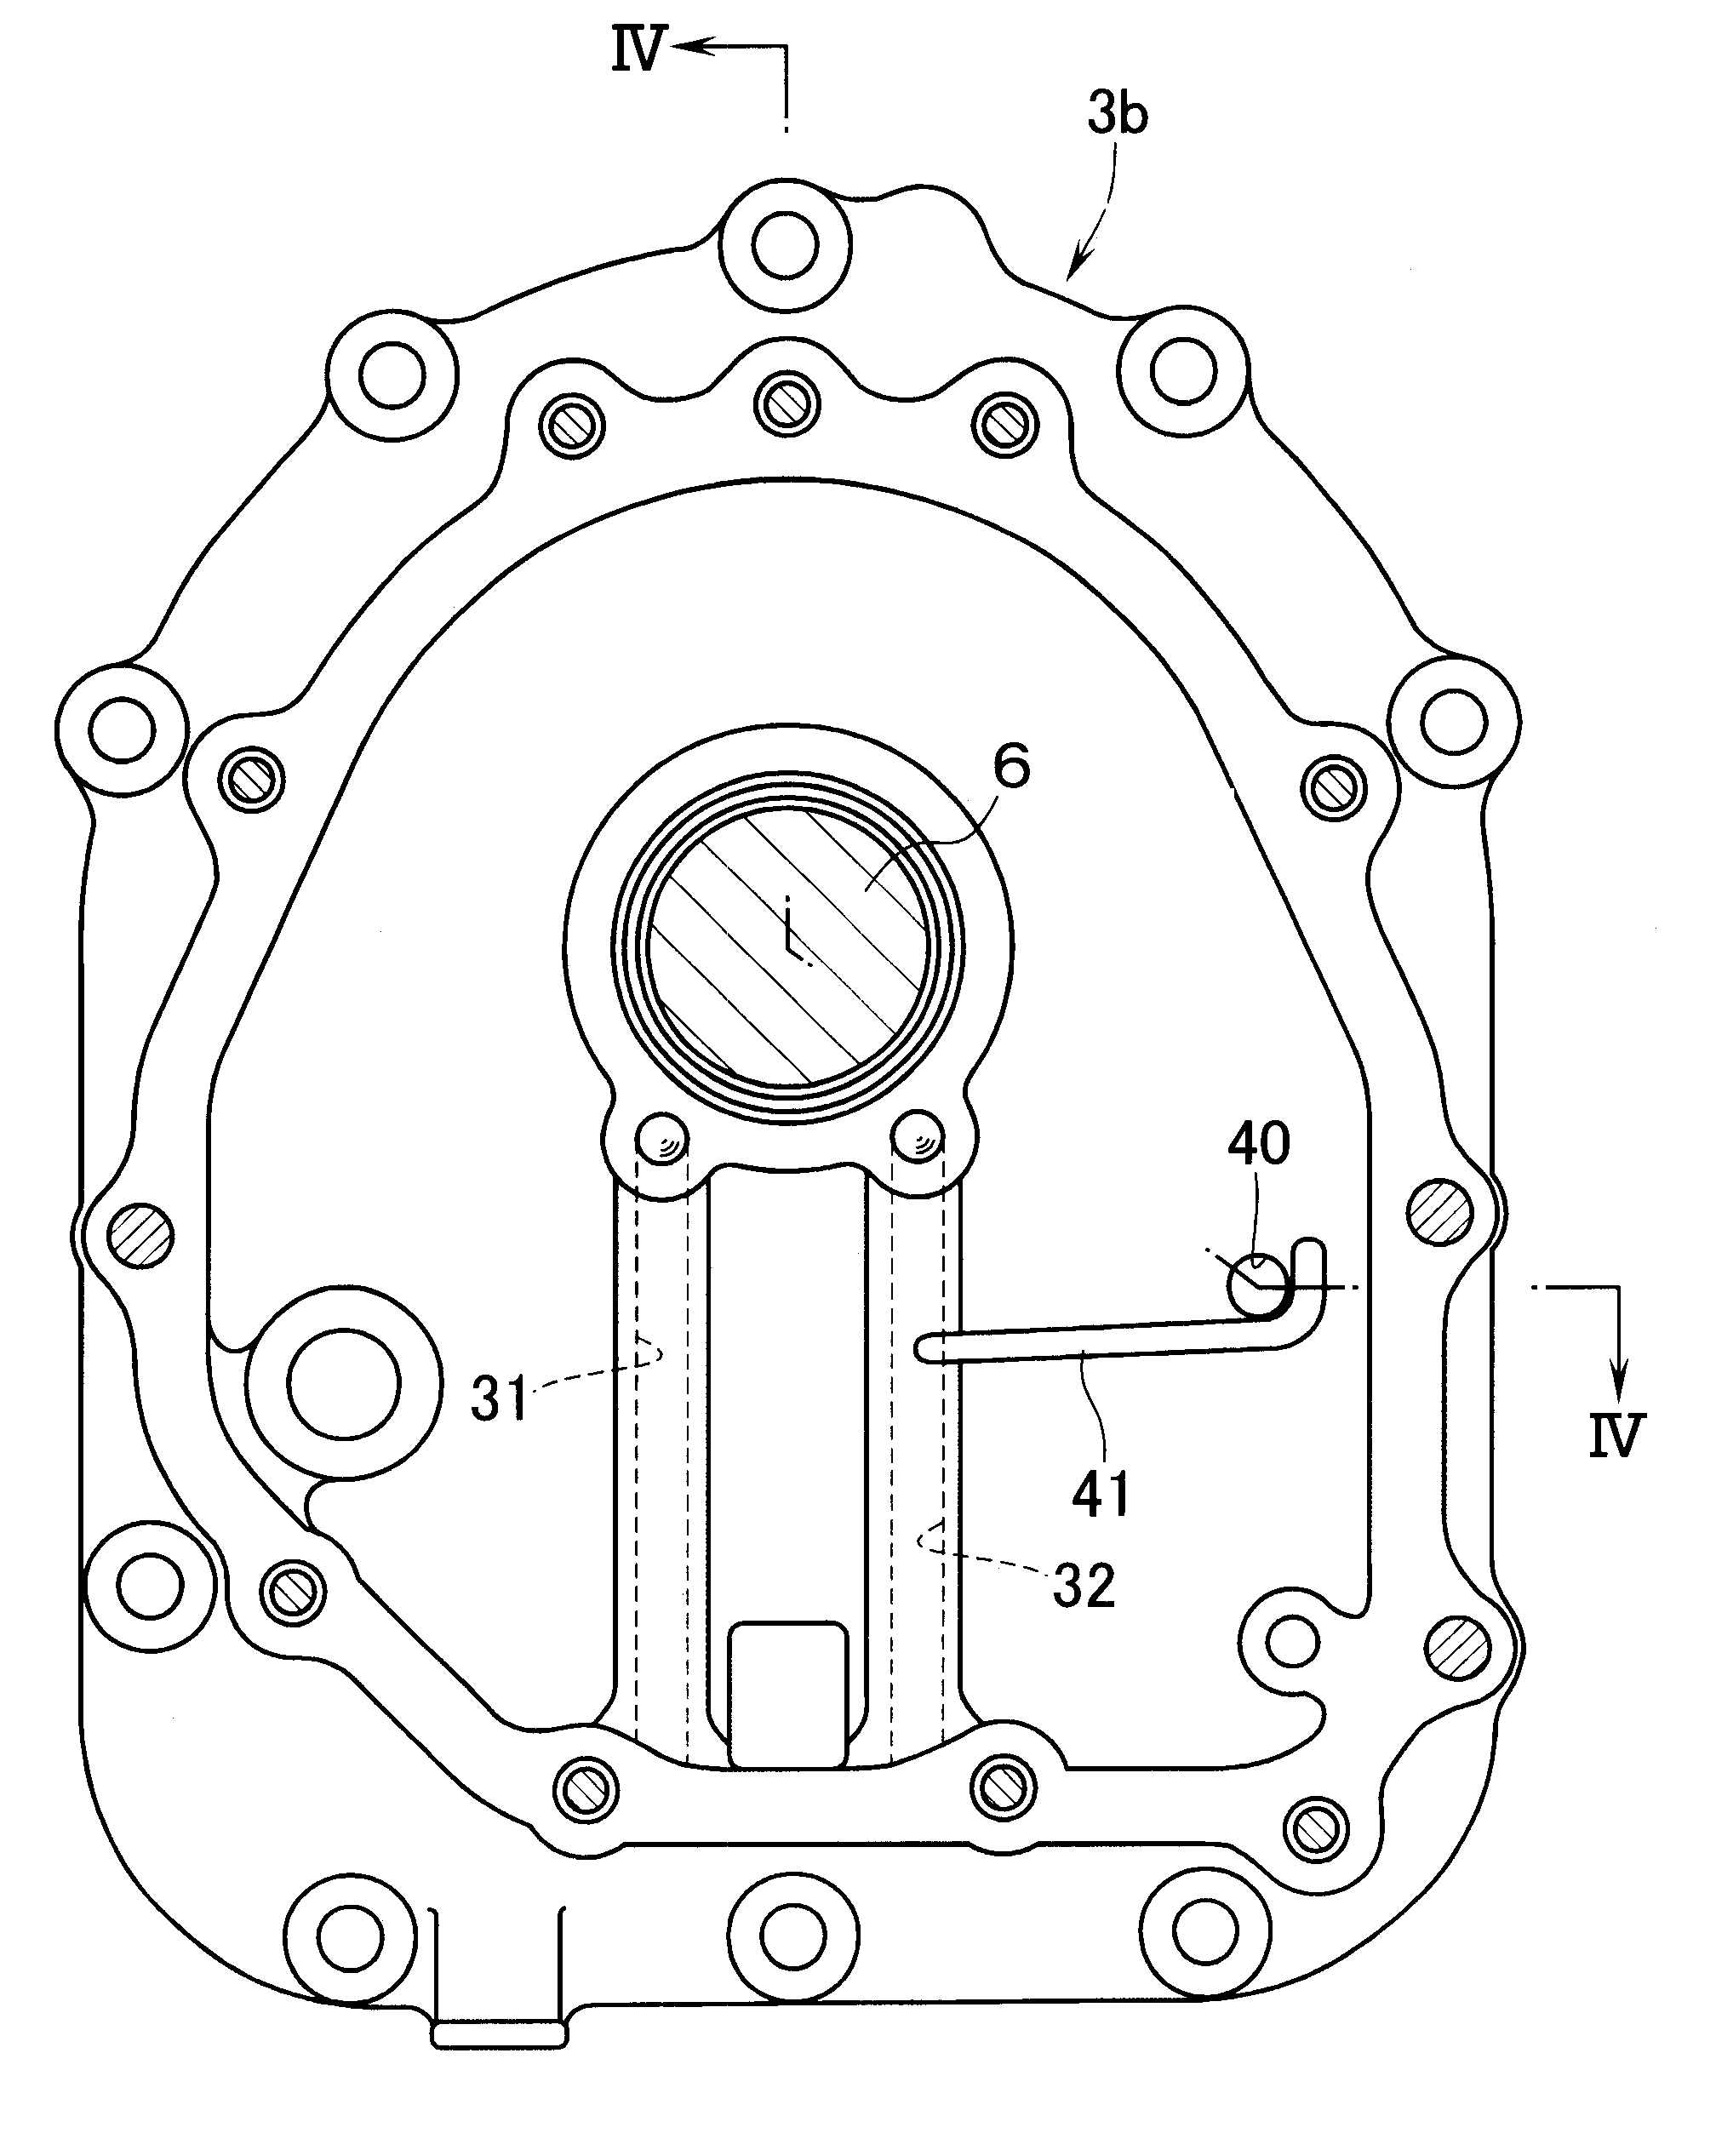 Lubricating structure for output shaft bearing portion in transmission